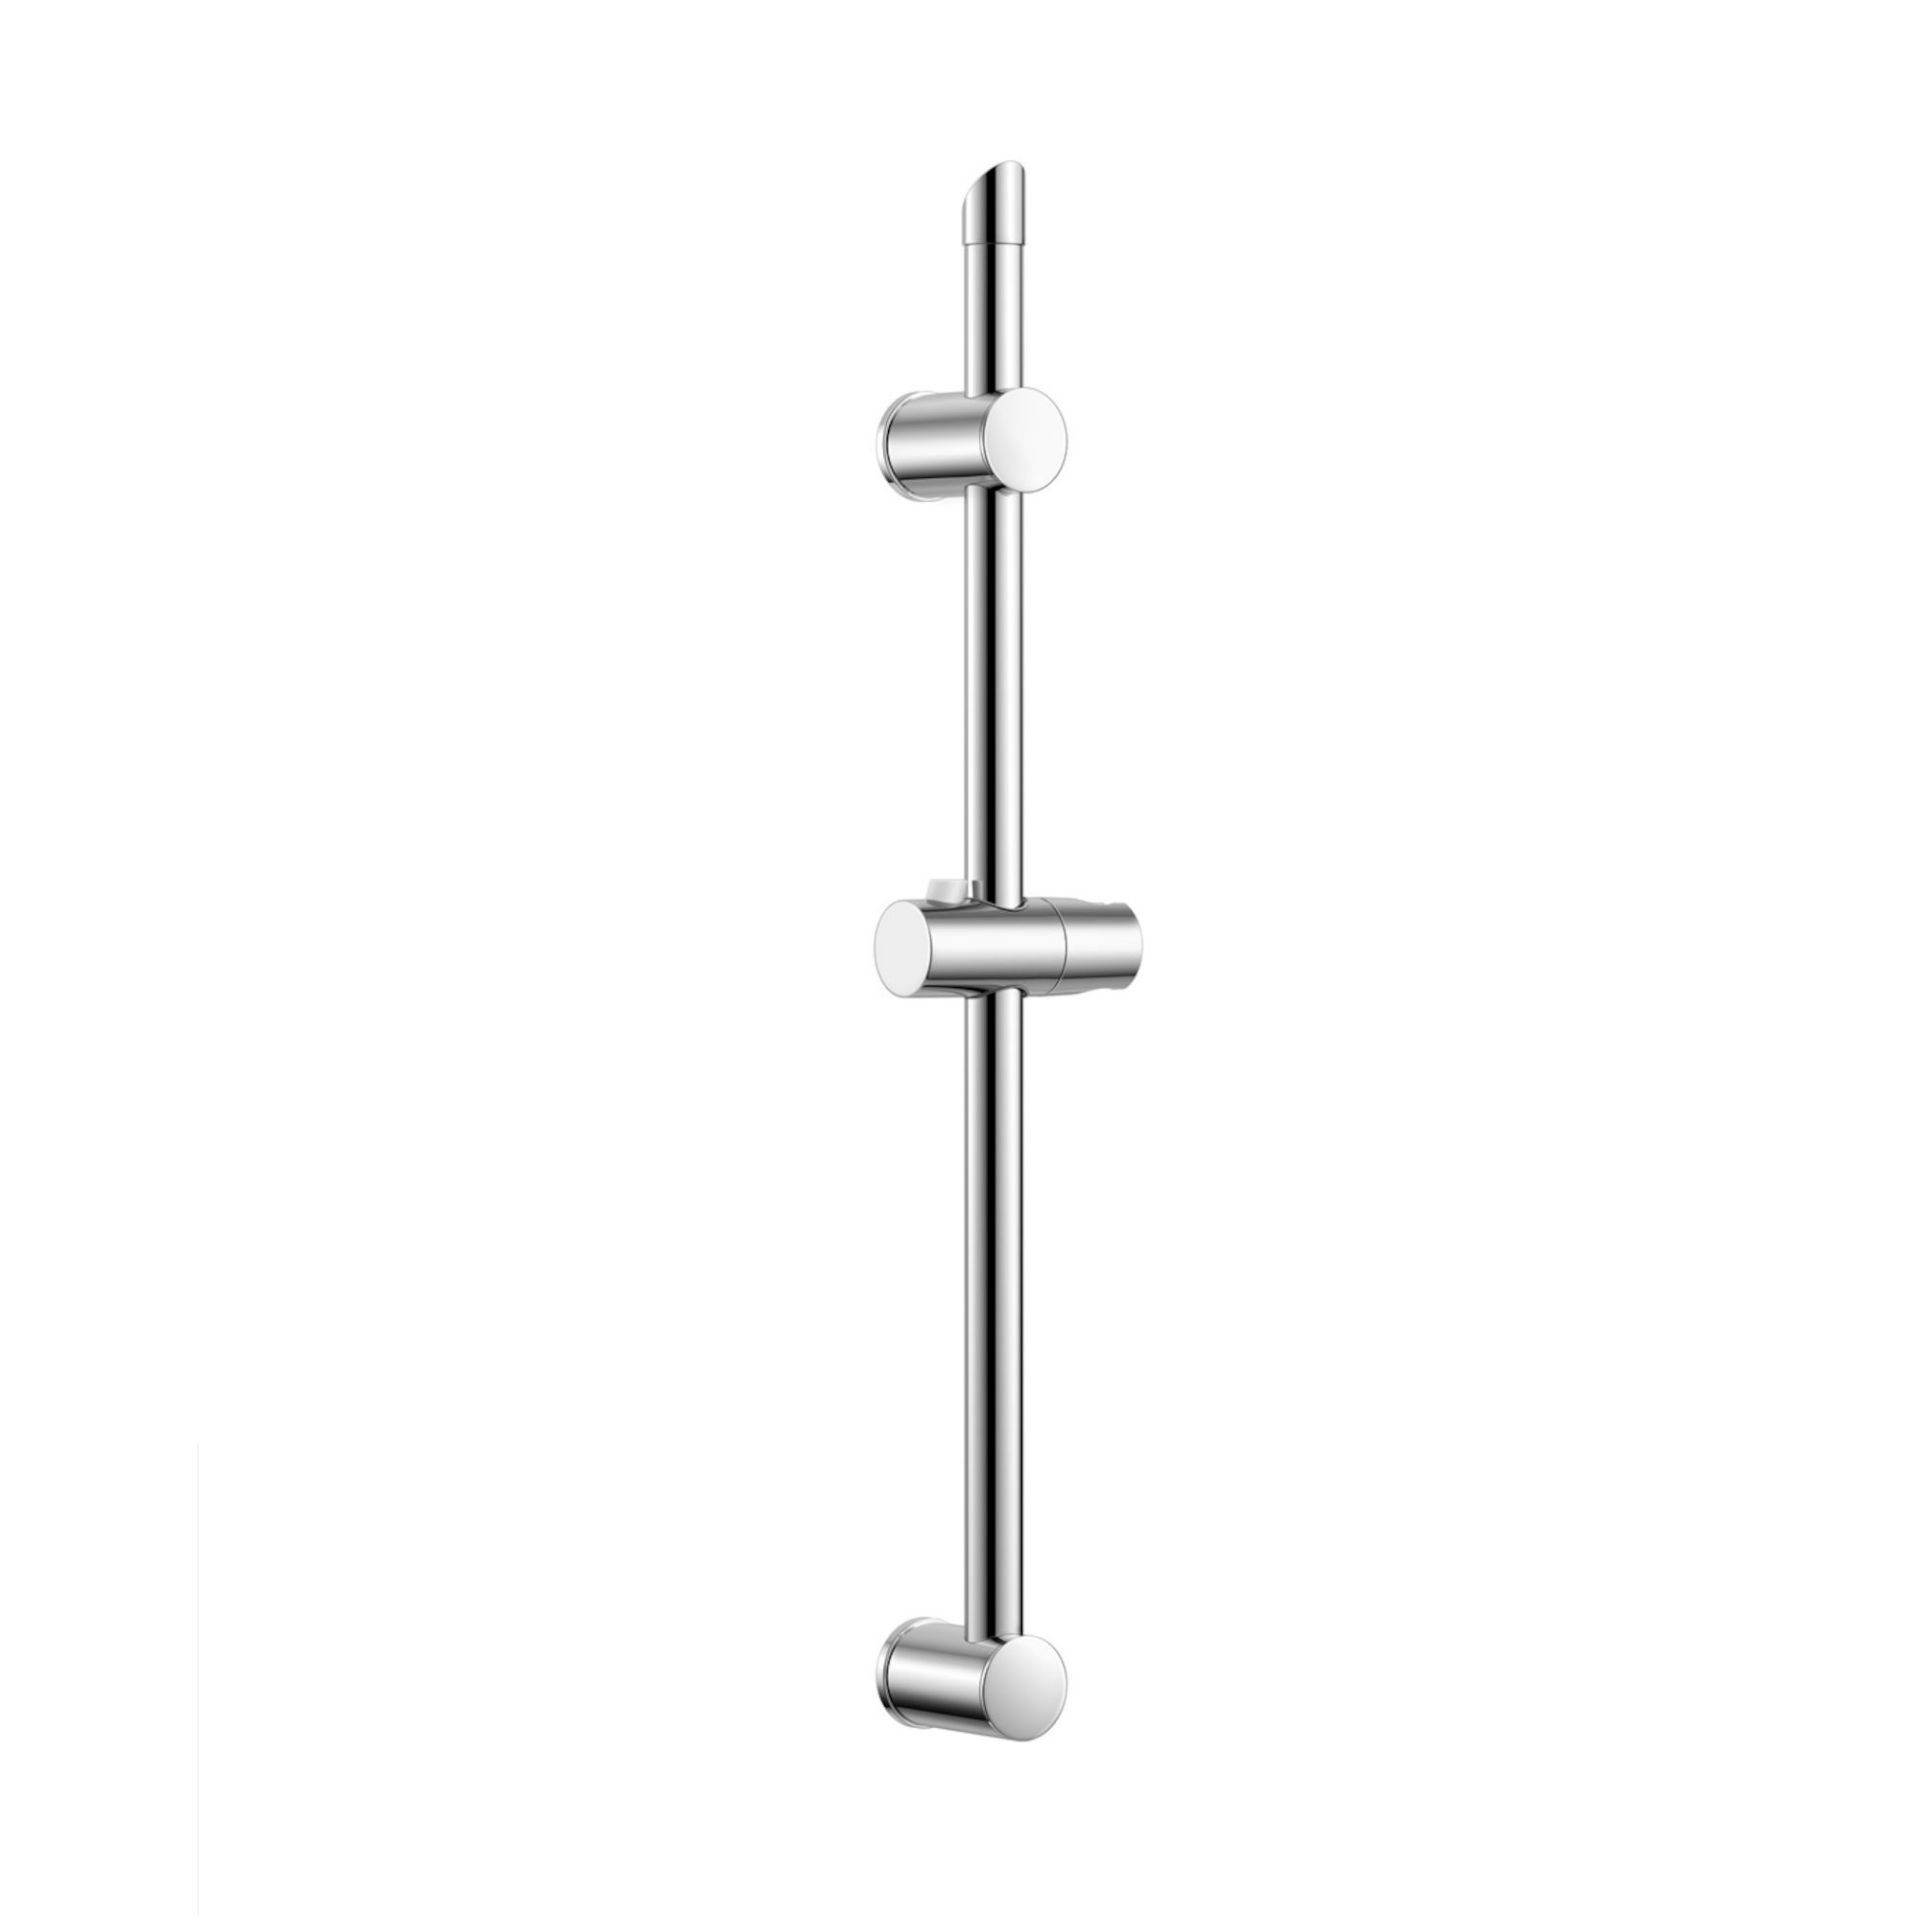 (SU1013) Round Stainless Steel Riser Rail This fixed height riser rail has a simple but gracef...